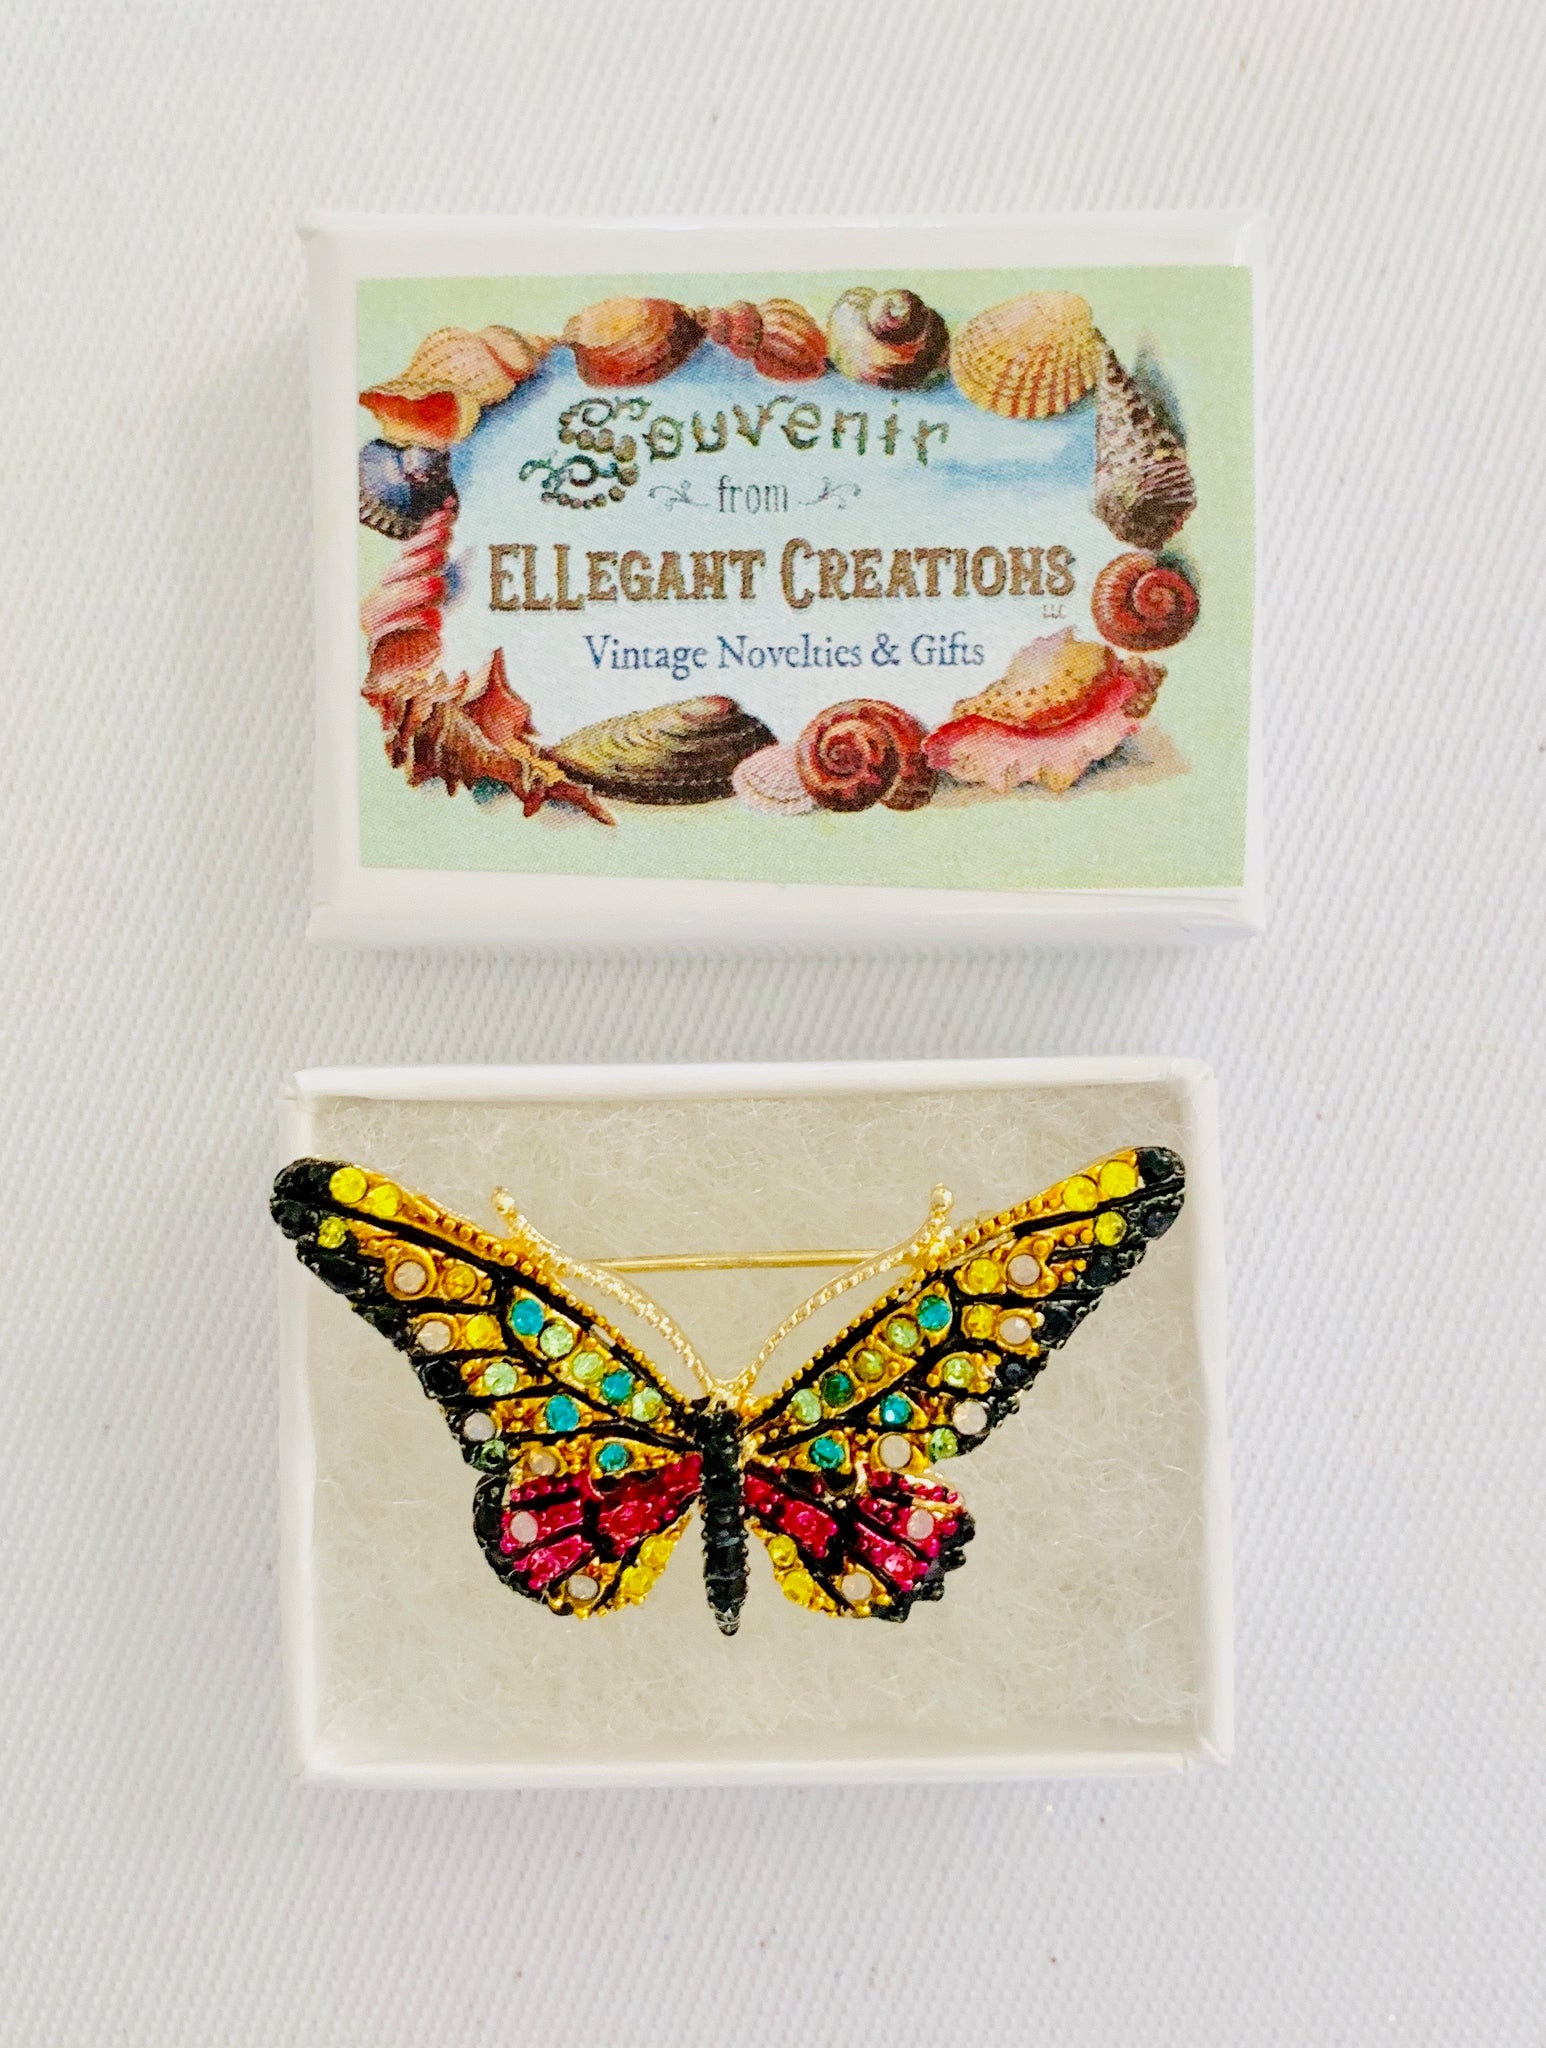 Pin BUTTERFLY